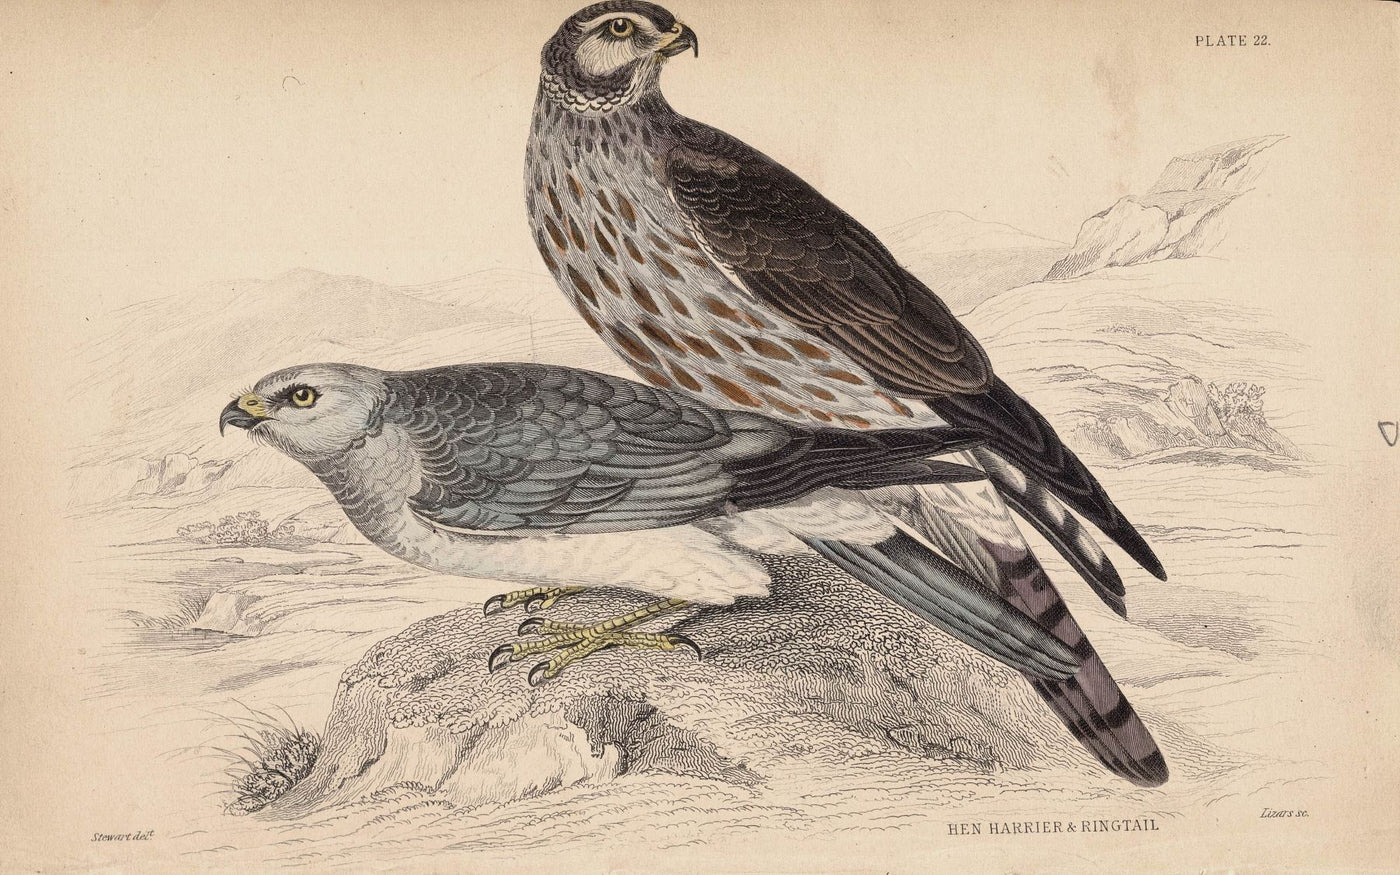 Hen Harrier and Ringtail antique print 1838